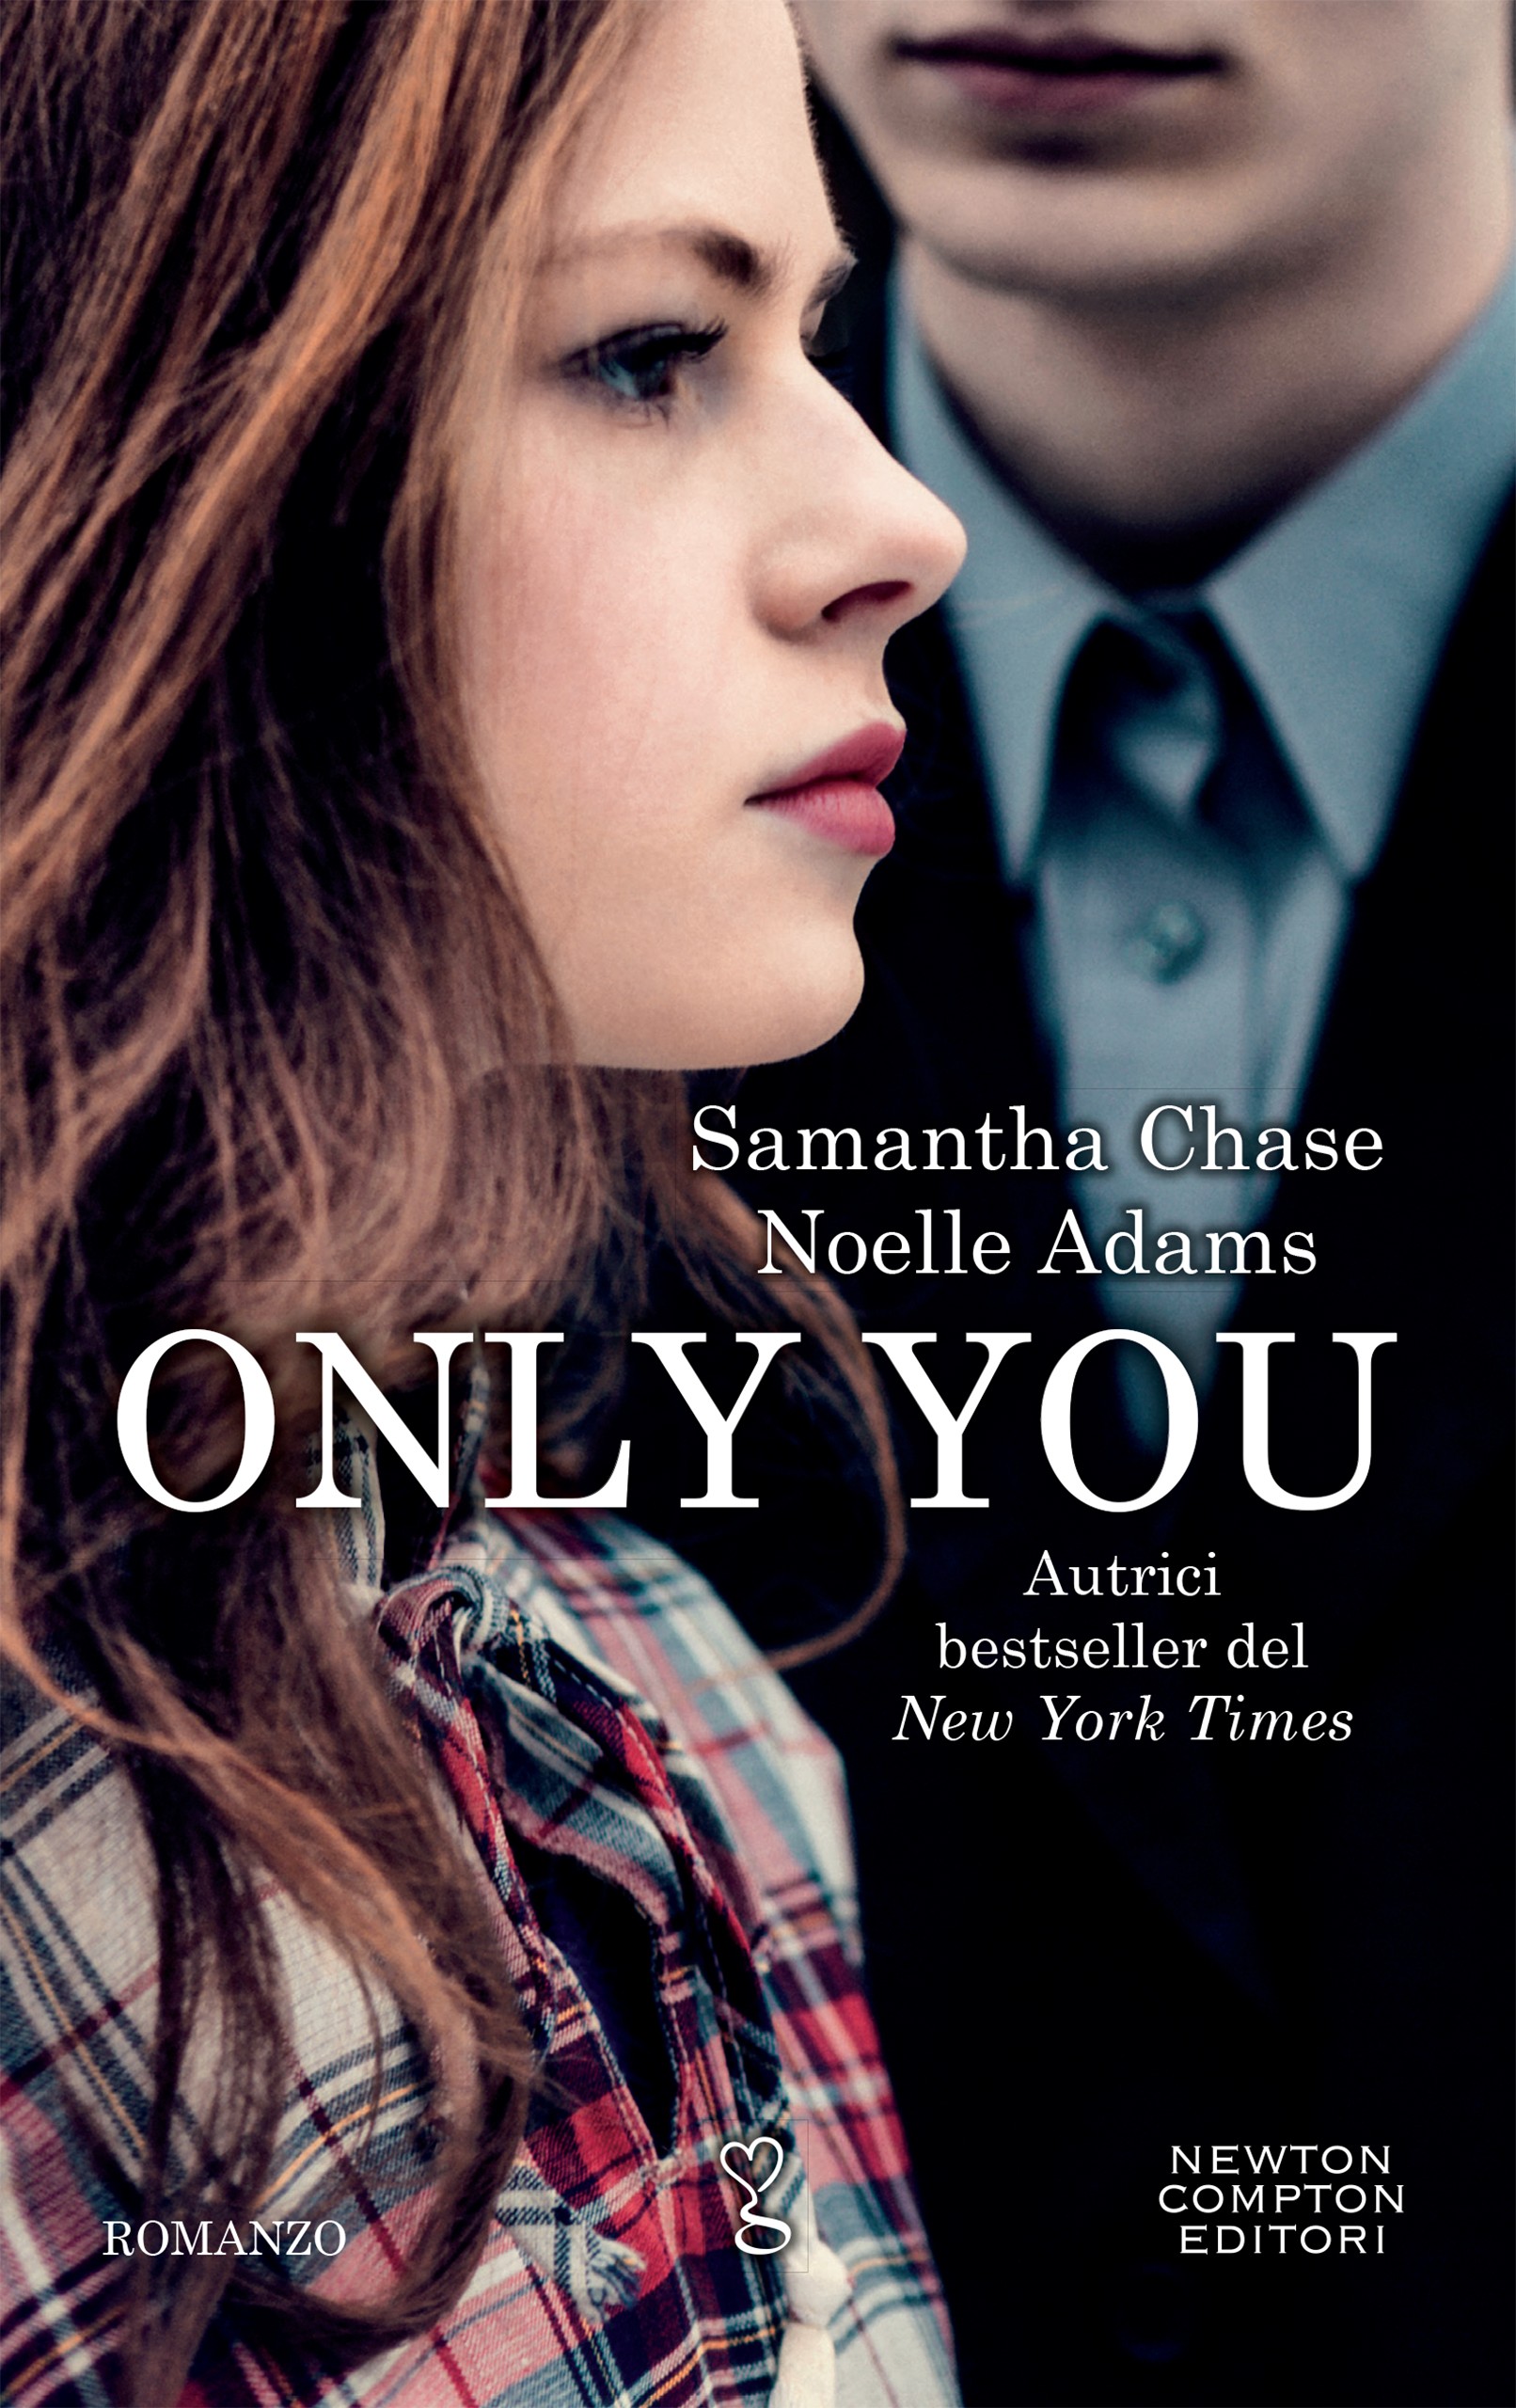 Only you - Librerie.coop